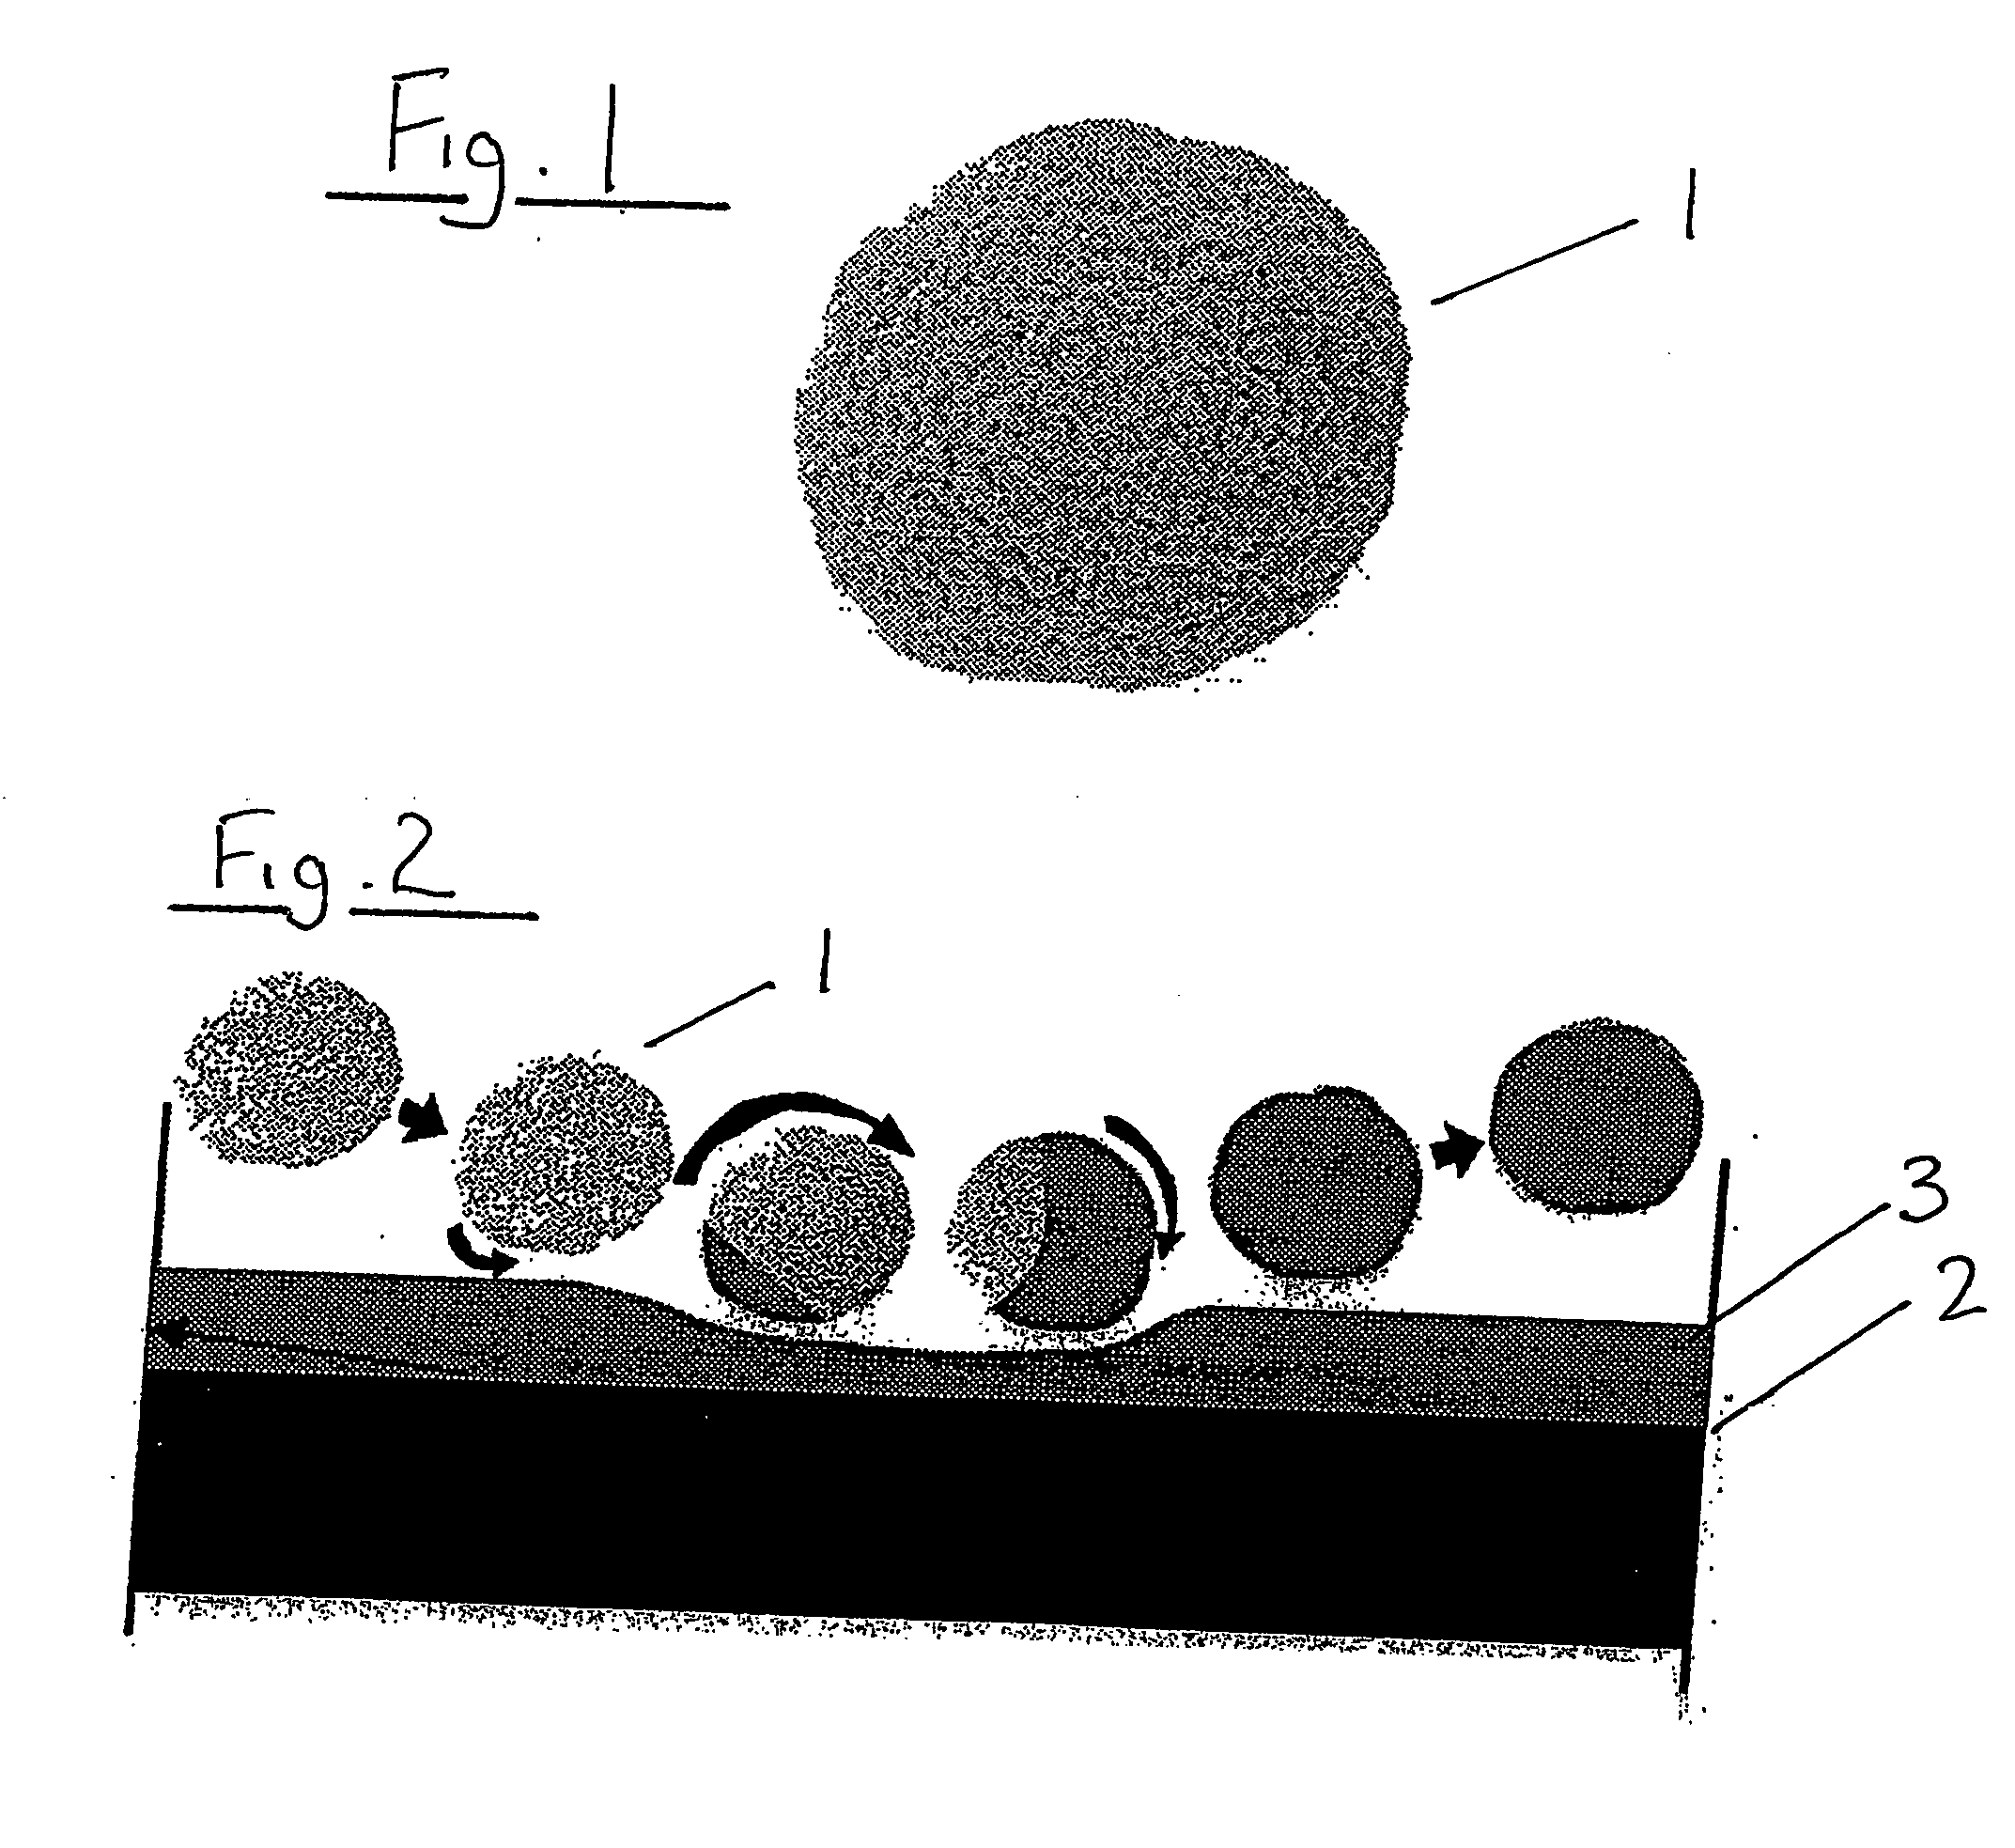 Process for treating a surface